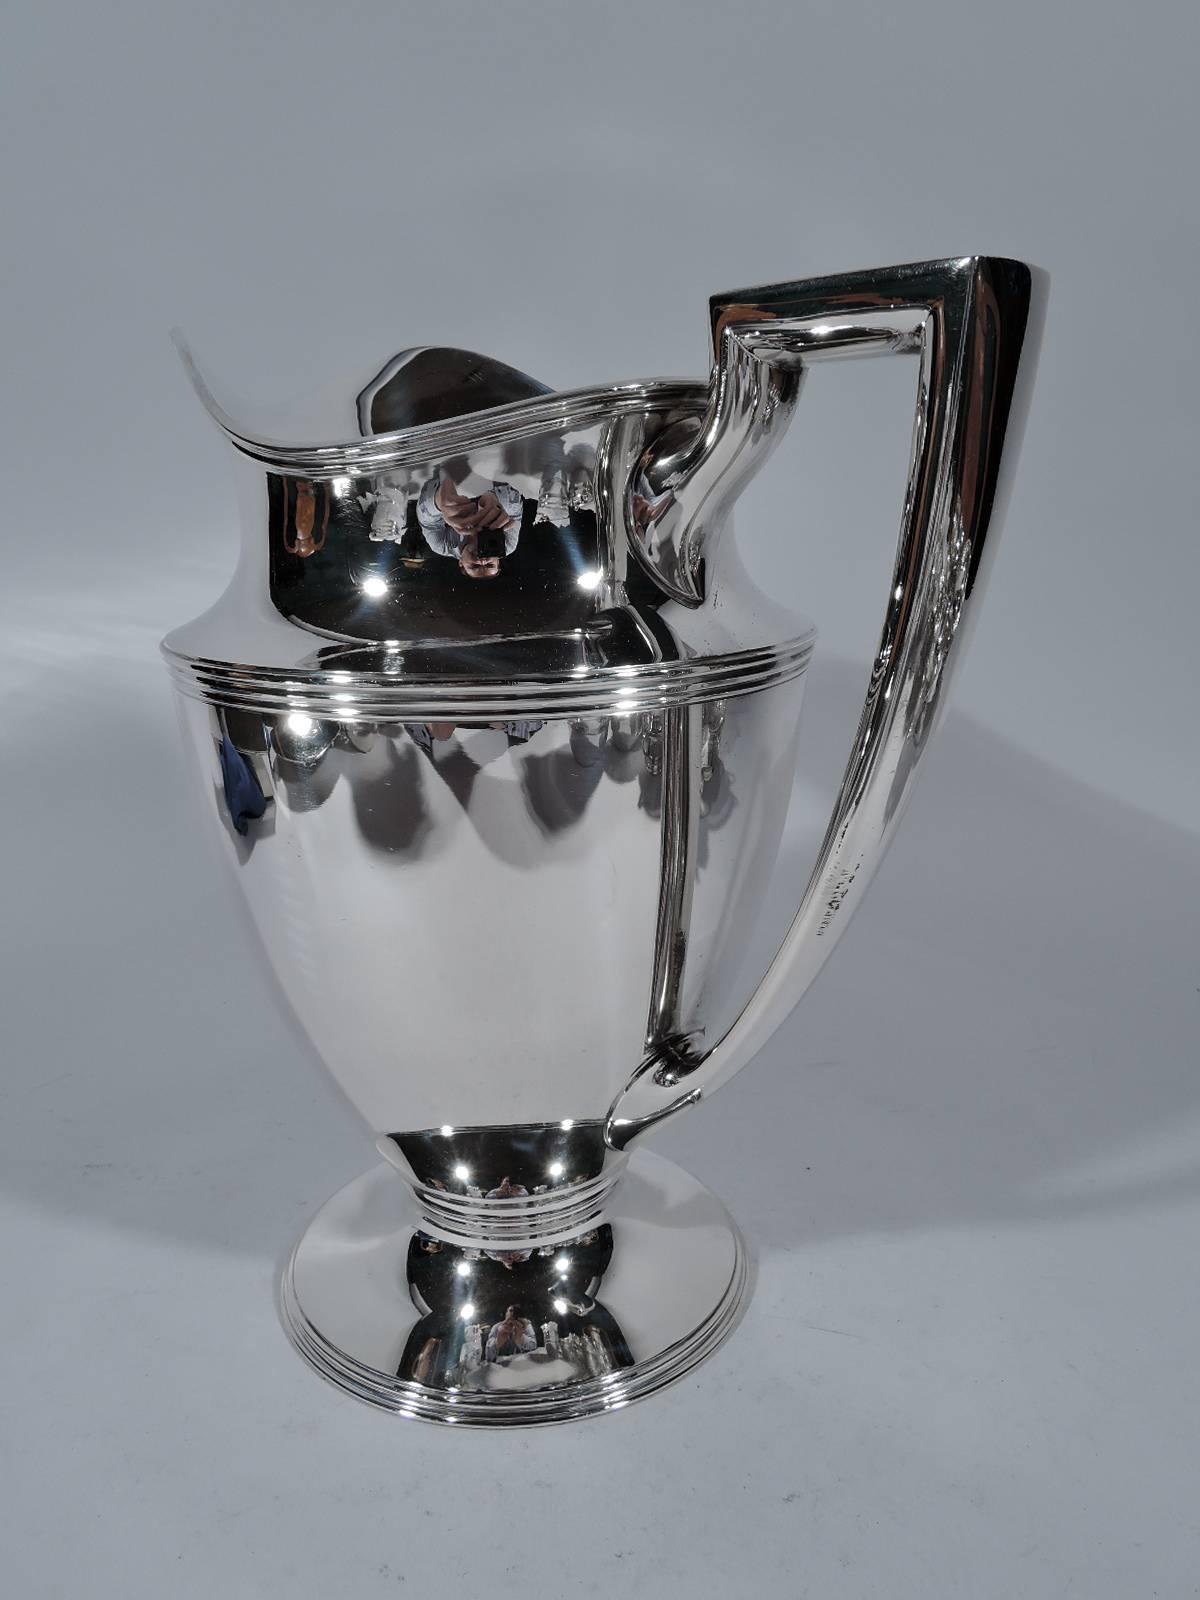 Sterling silver water pitcher. Made by Tiffany & Co. in New York. Curved and tapering body, raised and stepped foot, scrolled bracket handle, and helmet mouth. Ornamental reeding. Hallmark includes pattern no. 18181, director’s letter m (1907-1947),